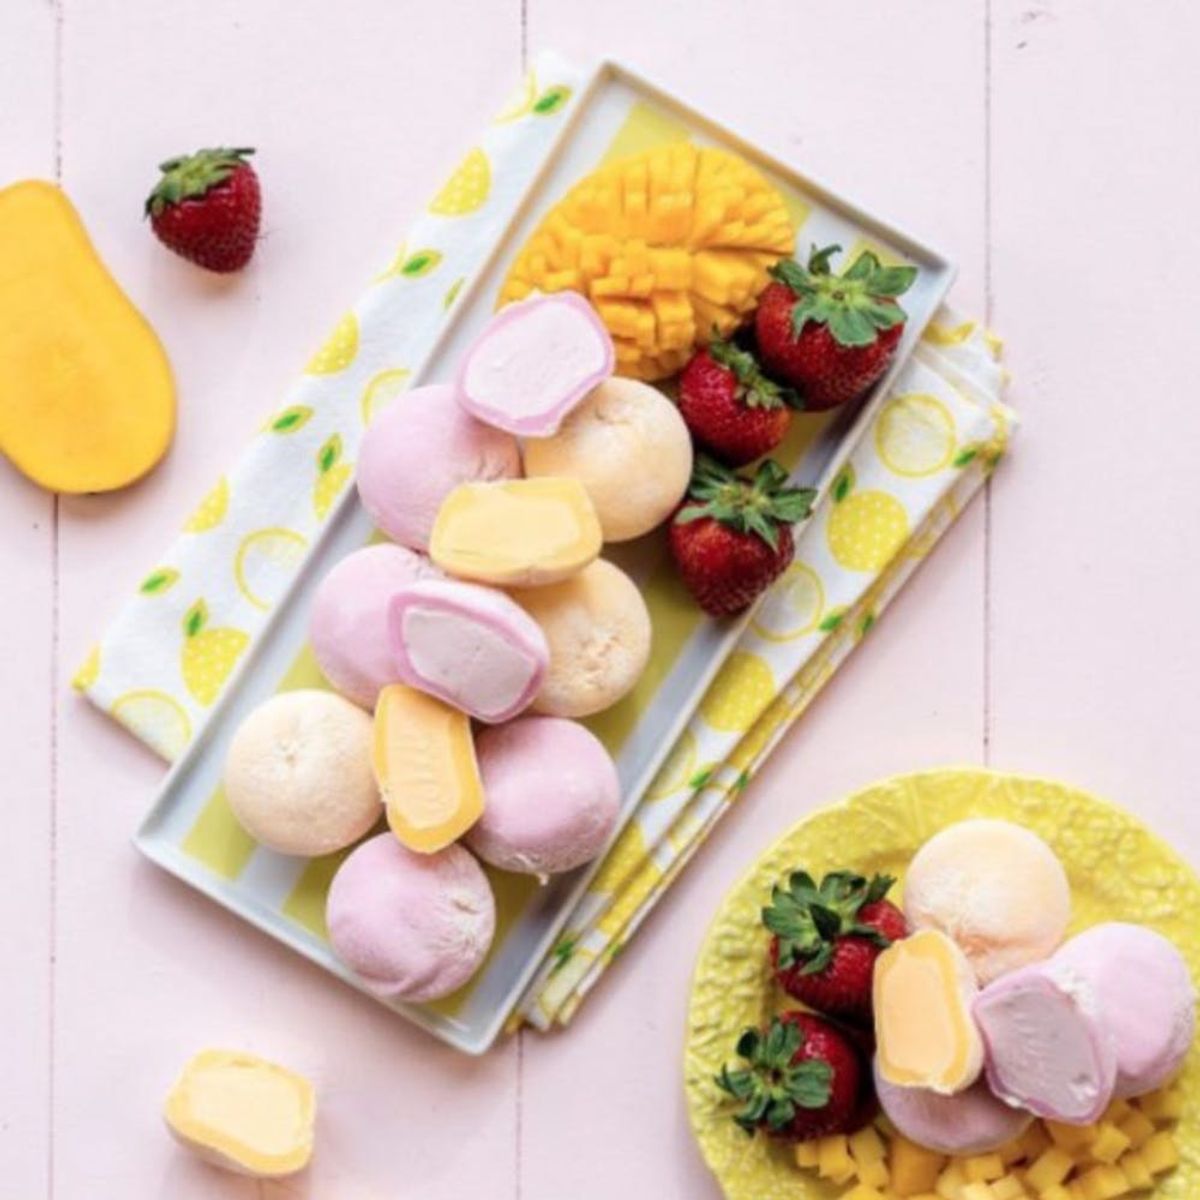 Get Ready to *Obsess* Over This Colorful Japanese Dessert